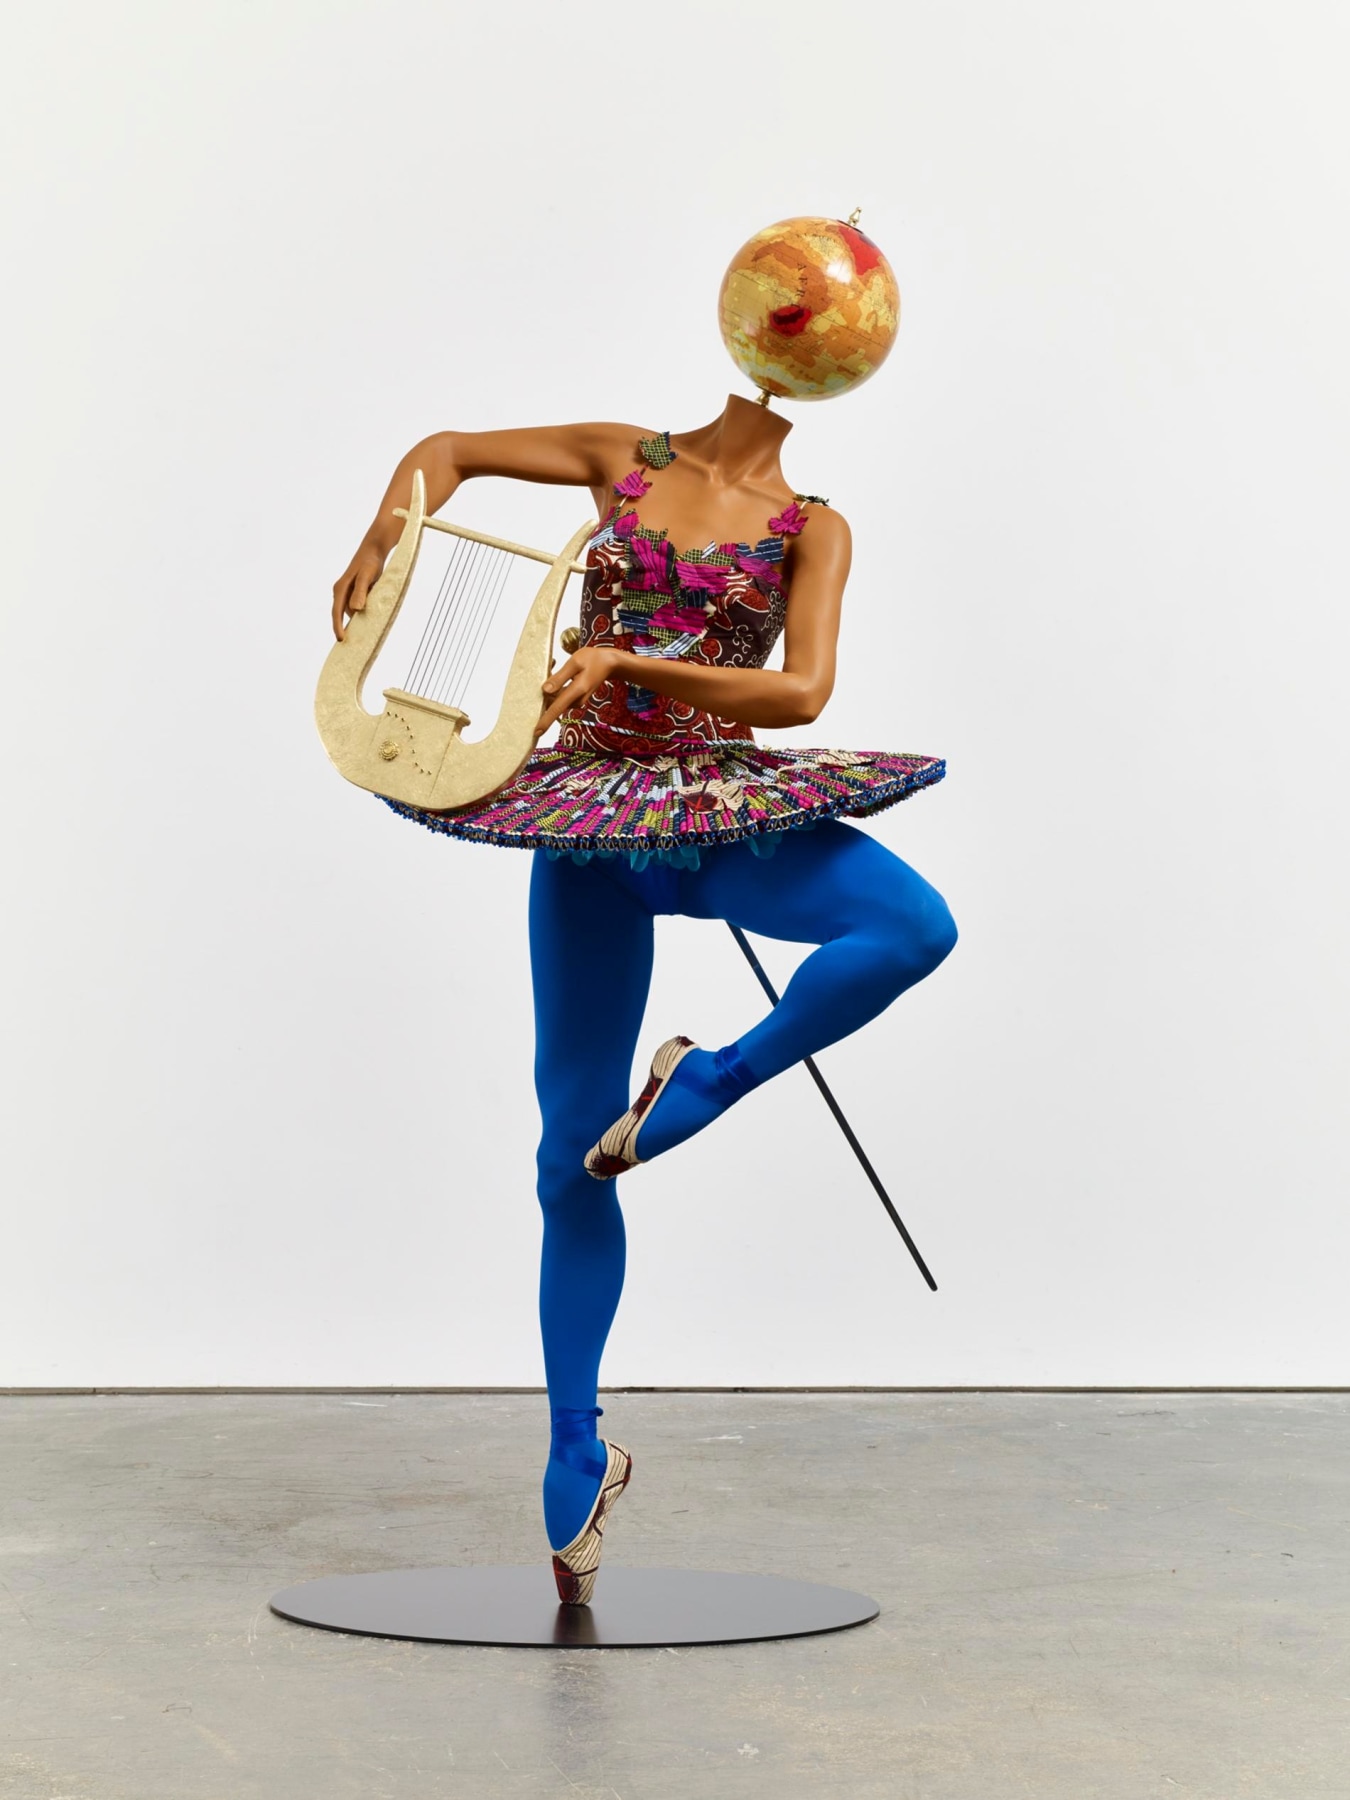 mannequin with a globe for a head holding a lyre whilst also dancing ballet